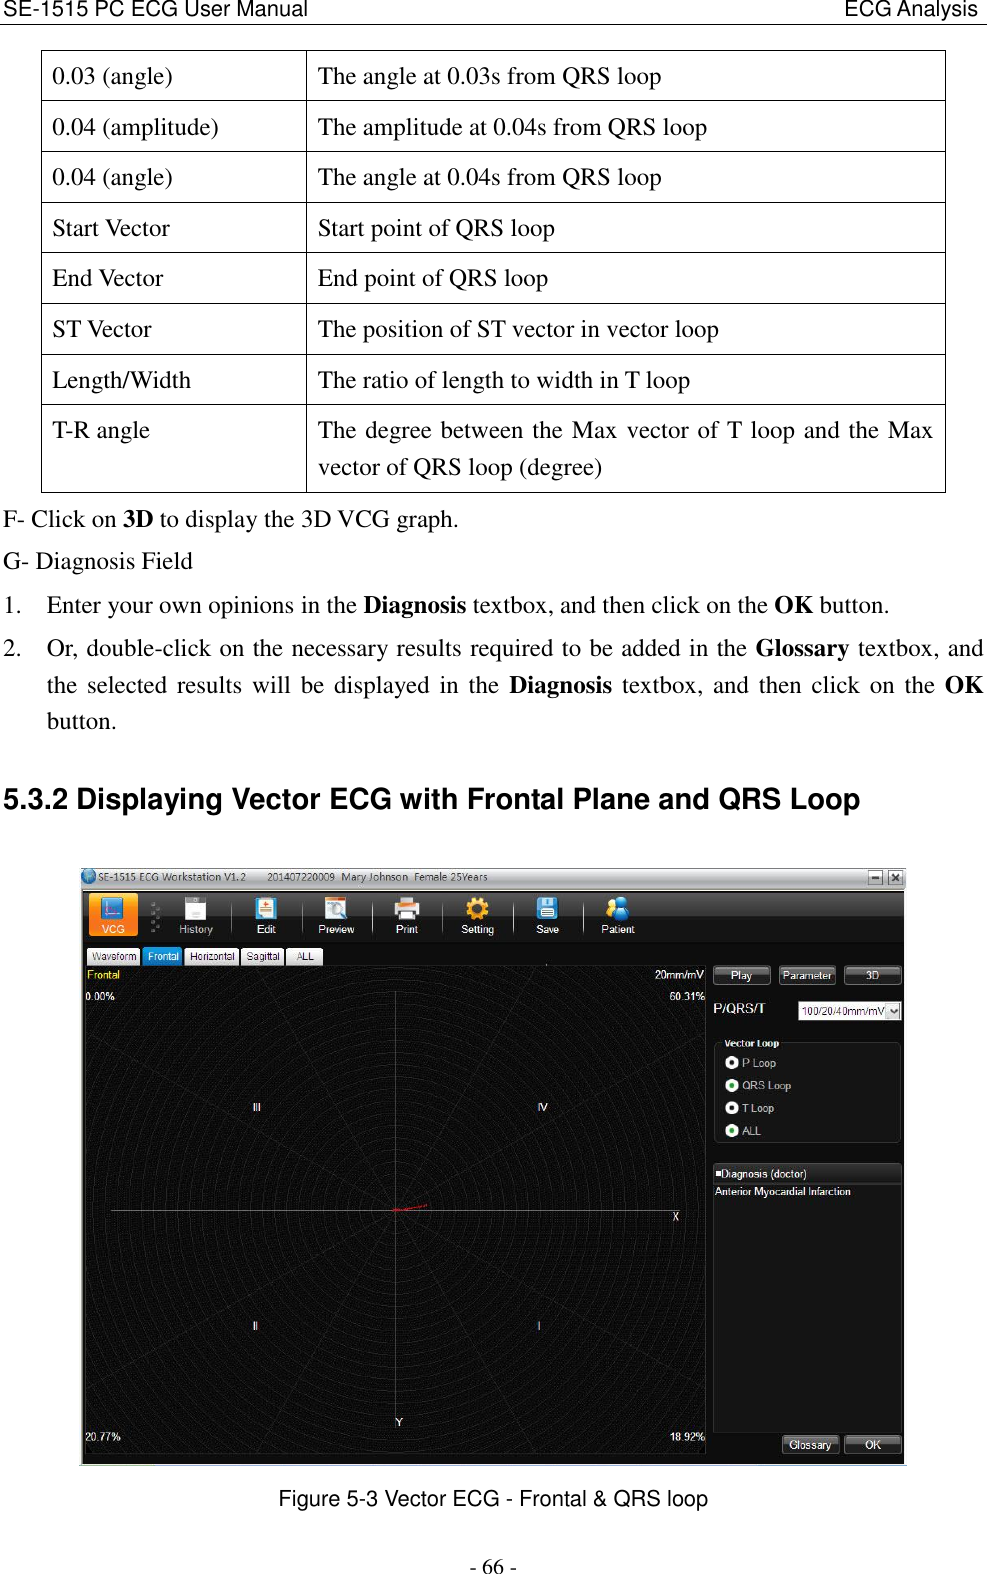 SE-1515 PC ECG User Manual                                                                                                  ECG Analysis - 66 - 0.03 (angle) The angle at 0.03s from QRS loop 0.04 (amplitude) The amplitude at 0.04s from QRS loop 0.04 (angle) The angle at 0.04s from QRS loop Start Vector Start point of QRS loop End Vector End point of QRS loop ST Vector The position of ST vector in vector loop Length/Width The ratio of length to width in T loop T-R angle The degree between the Max vector of T loop and the Max vector of QRS loop (degree) F- Click on 3D to display the 3D VCG graph. G- Diagnosis Field 1. Enter your own opinions in the Diagnosis textbox, and then click on the OK button. 2. Or, double-click on the necessary results required to be added in the Glossary textbox, and the selected results  will be  displayed in  the  Diagnosis  textbox, and then click on the OK button. 5.3.2 Displaying Vector ECG with Frontal Plane and QRS Loop  Figure 5-3 Vector ECG - Frontal &amp; QRS loop 